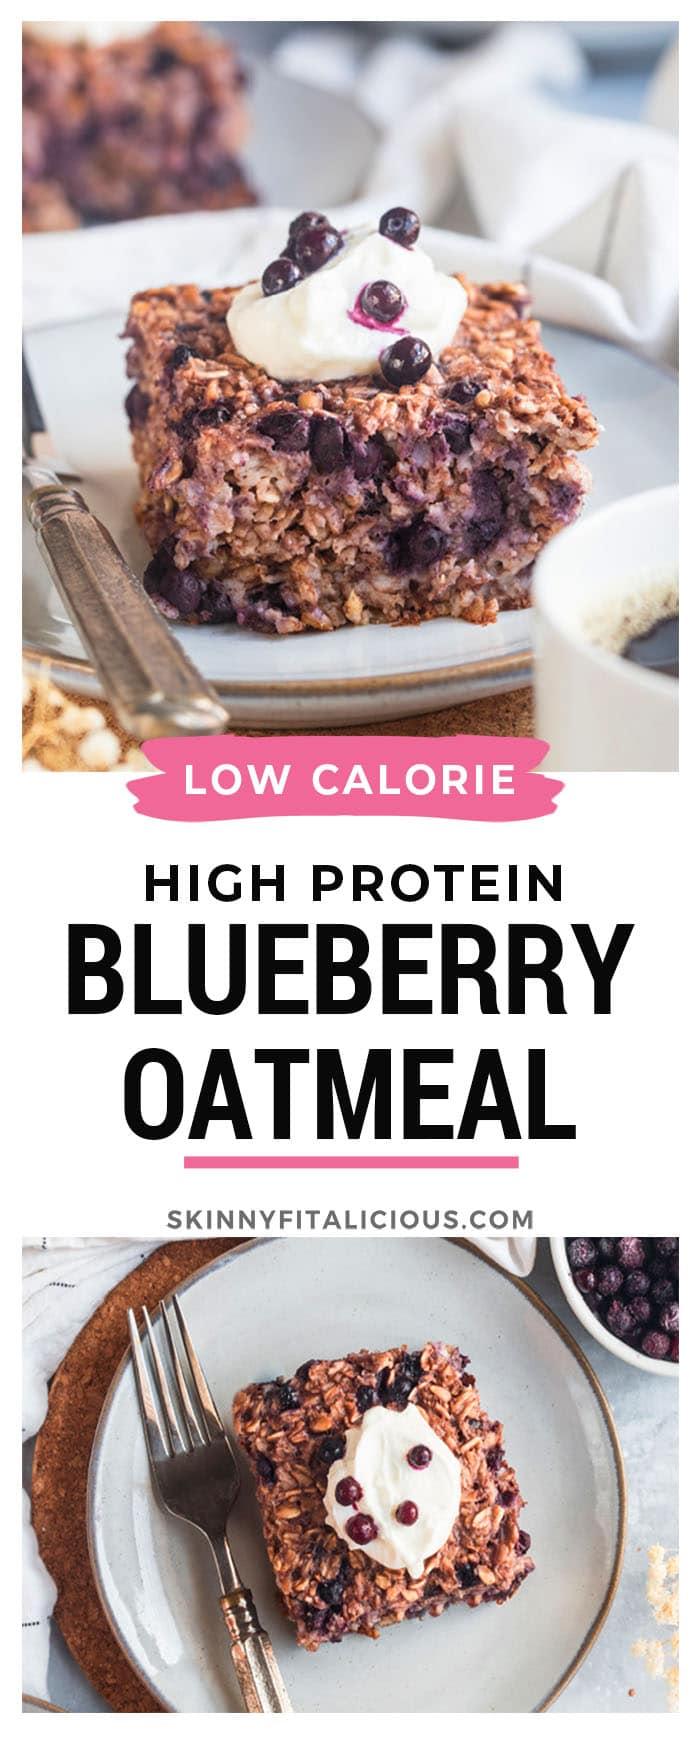 High Protein Blueberry Oatmeal Bake recipe is a healthy breakfast that is low calorie, gluten free and packed with protein. 